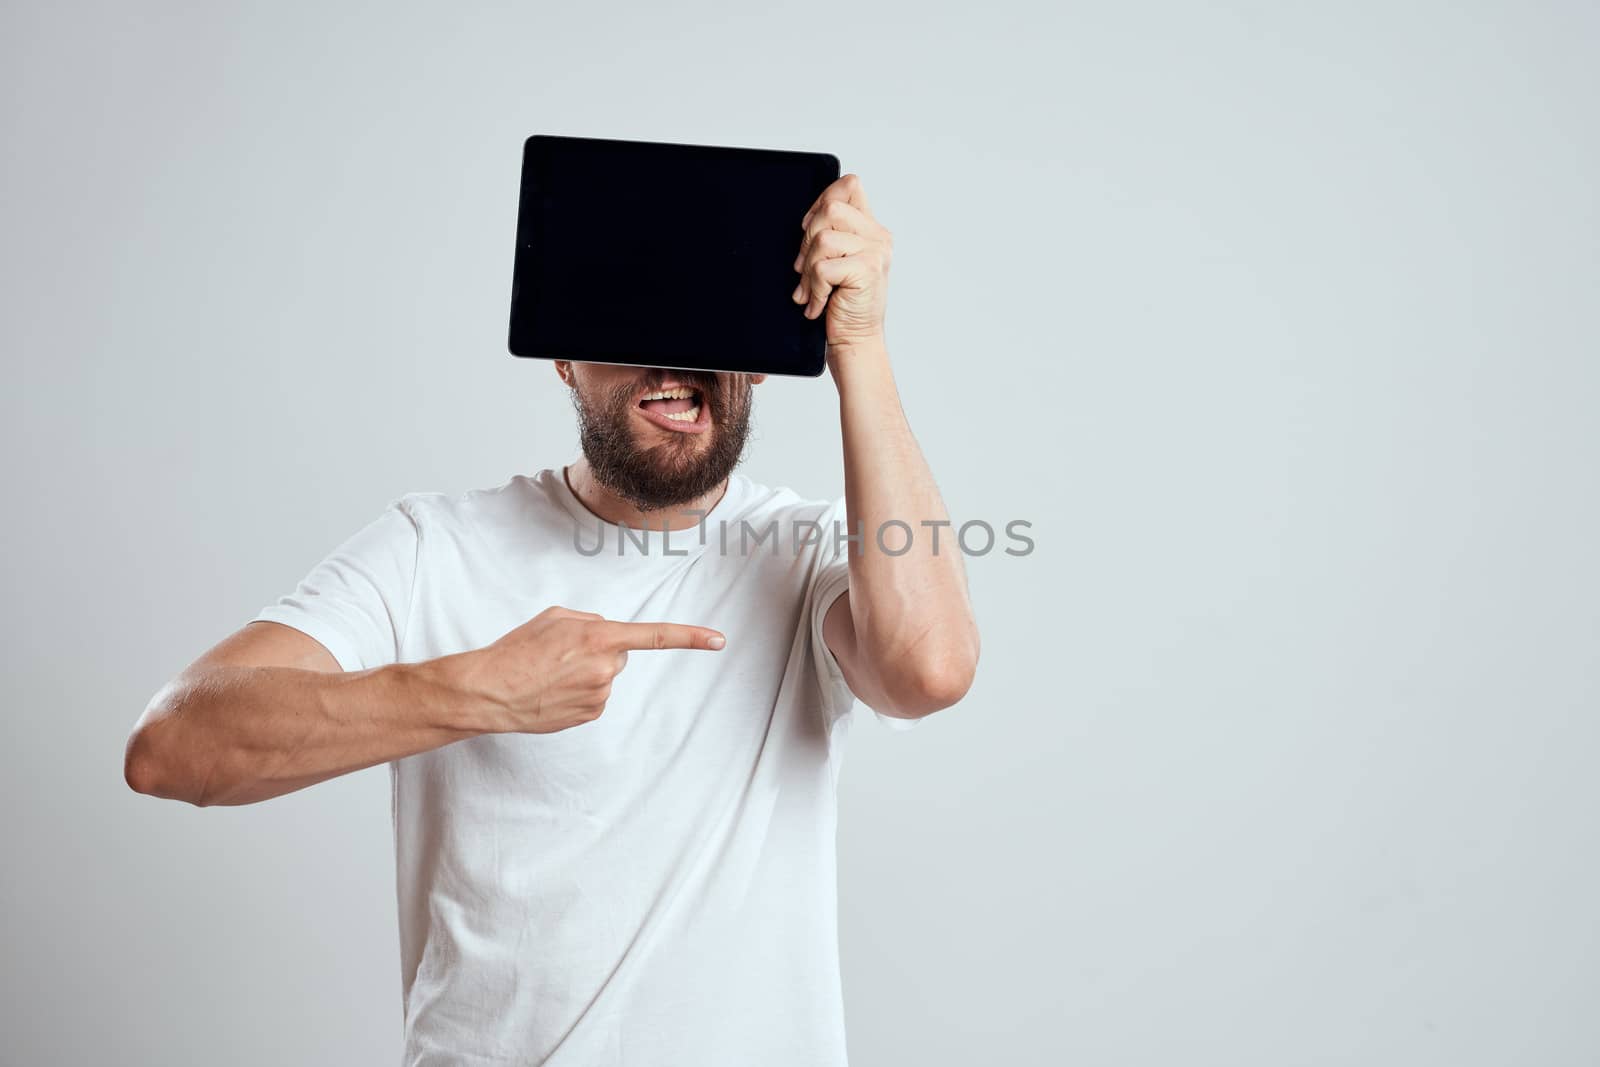 emotional man with a tablet in front of his eyes gesturing with his hands cropped view Copy Space Model light background. High quality photo